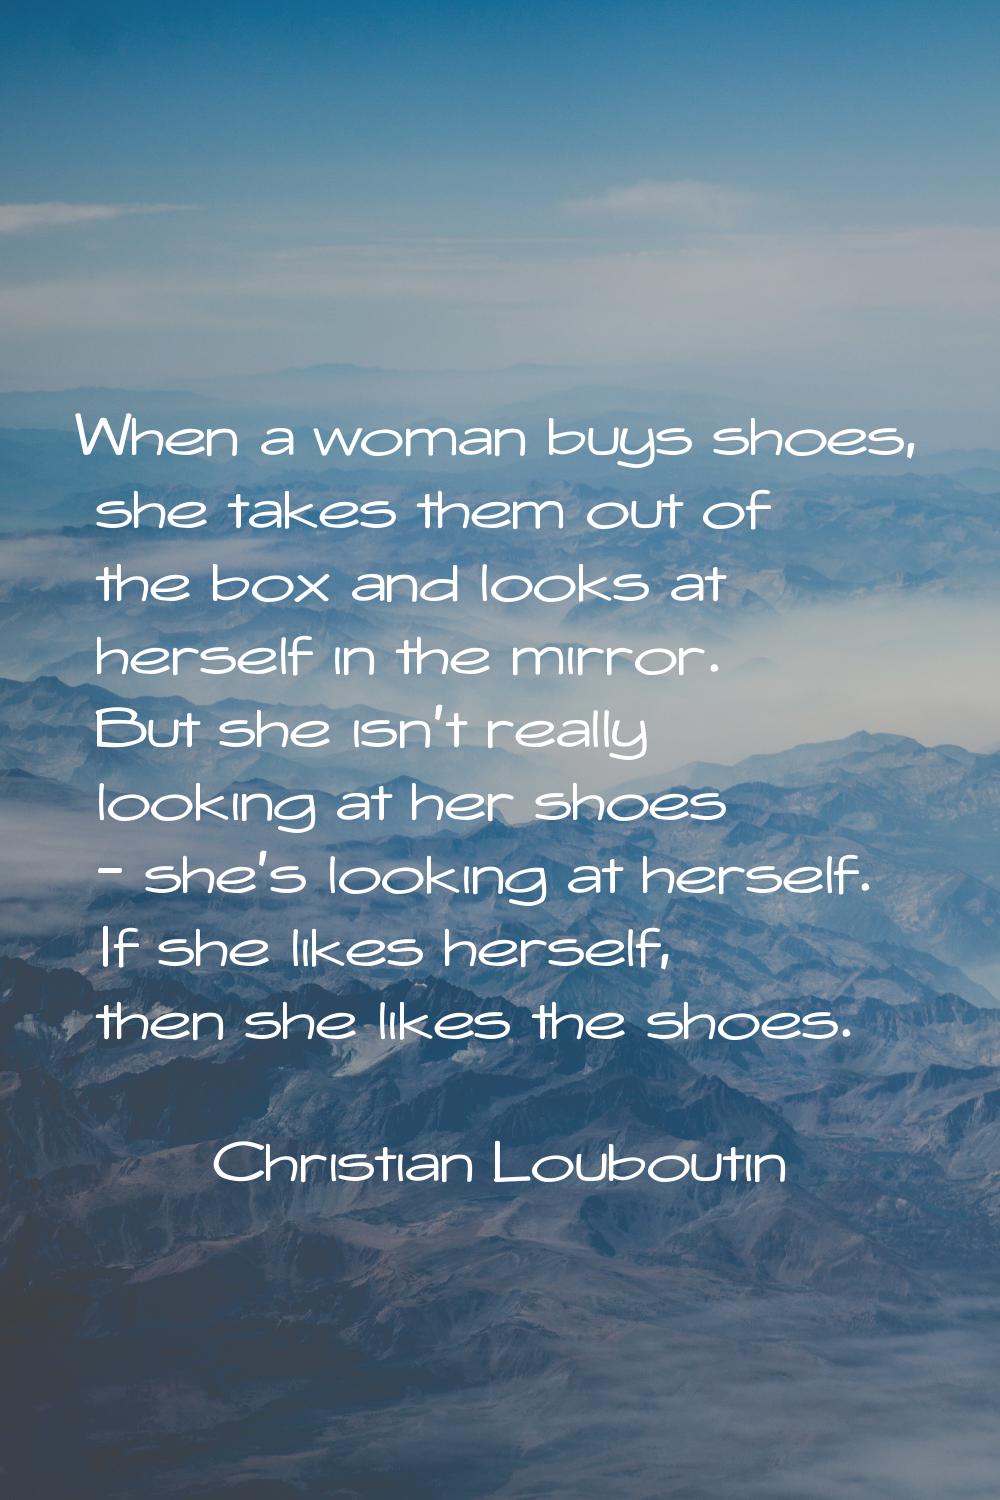 When a woman buys shoes, she takes them out of the box and looks at herself in the mirror. But she 